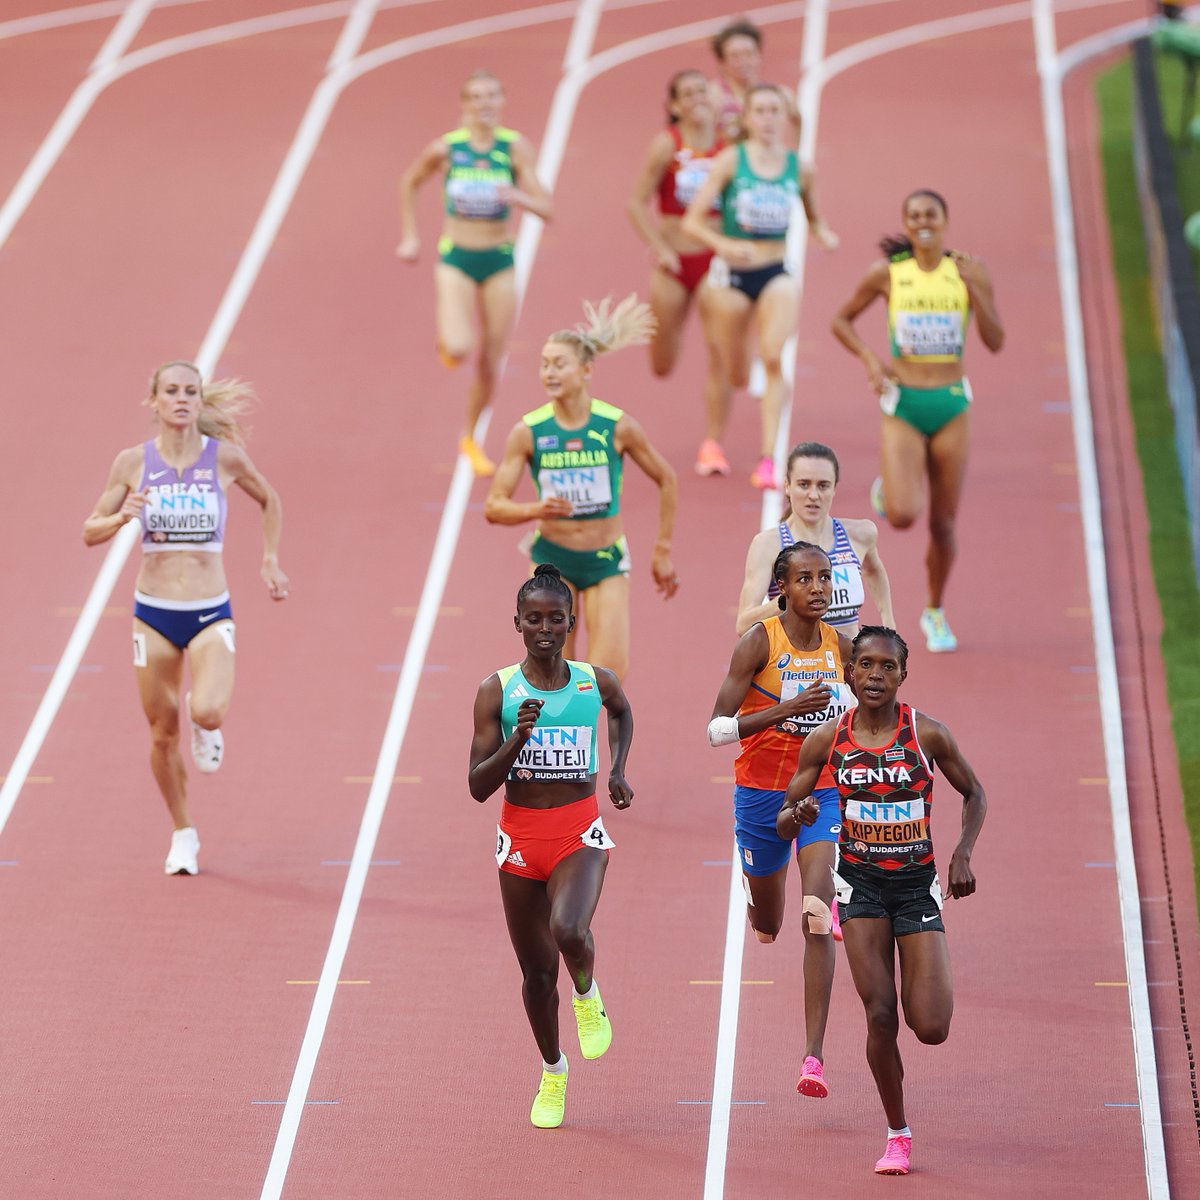 The best depth ever in a major championships race 😳 The second women's 1500m semi-final saw 9 women break 4 minutes 😤 World record-holder Faith Kipyegon heads into the final with a strong 3:55.14. #WorldAthleticsChamps